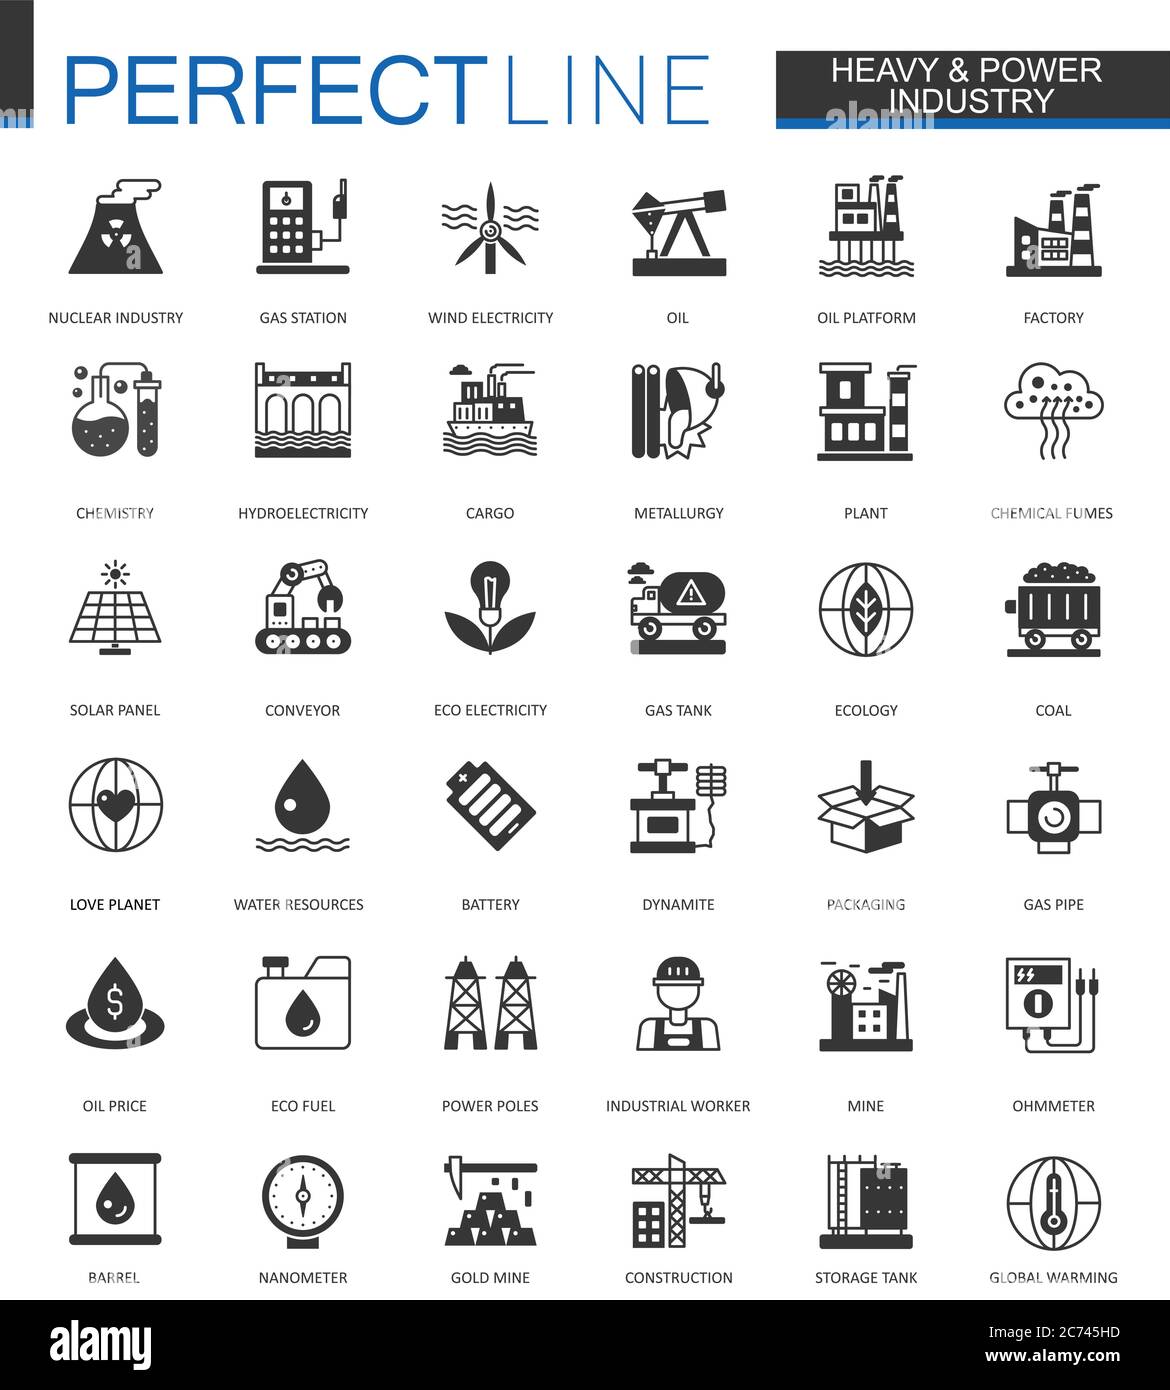 Black classic oil, heavy and power industry web icons set Stock Vector